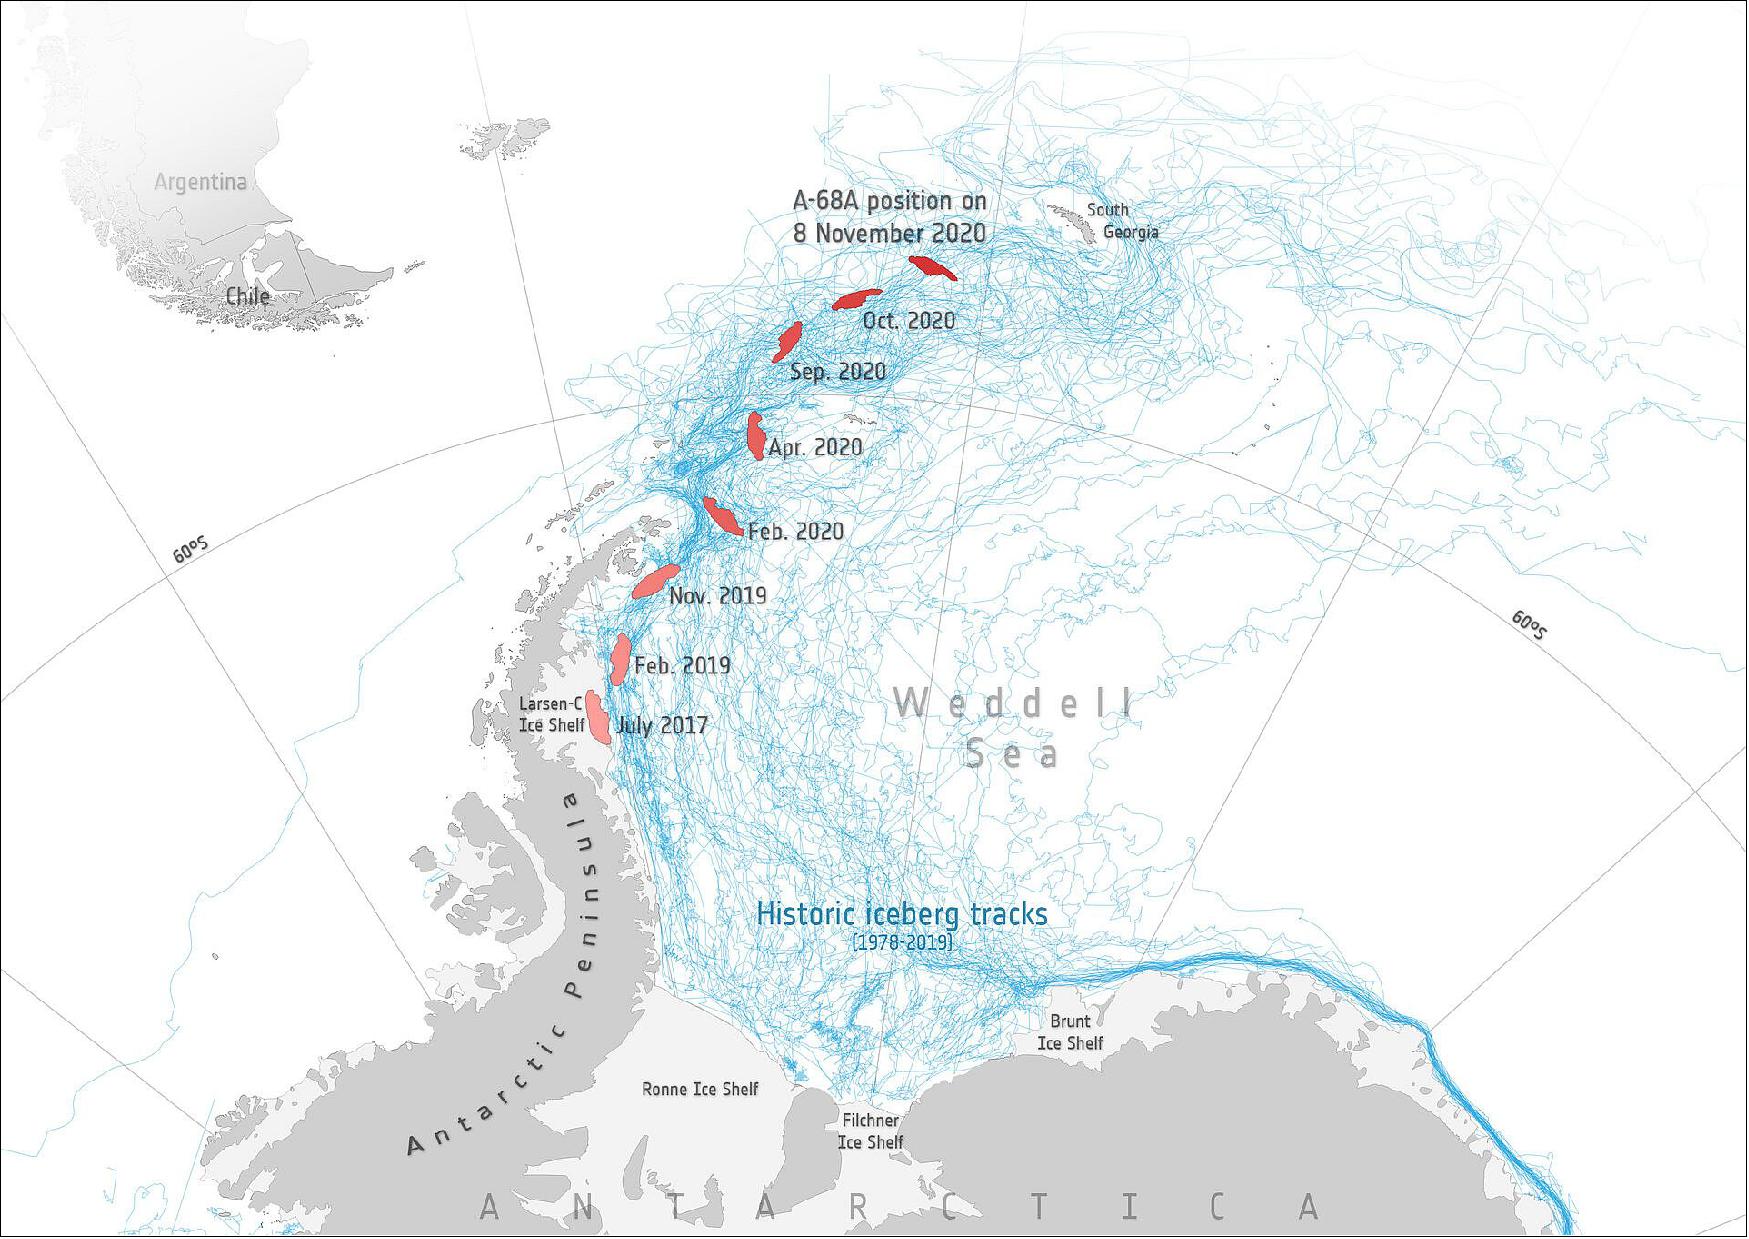 Figure 4: The map includes historic iceberg tracks, based on data from a number of satellites including ESA’s ERS-1 and ERS-2 as part of the Antarctic Iceberg Tracking Database, and shows that A-68A is following this well-trodden path. Hopefully, currents will take A-68A around South Georgia and off to the northwest, and eventually break up (image credit: ESA, the map contains modified Copernicus Sentinel data (2017–20), processed by ESA; Antarctic Iceberg Tracking Database)